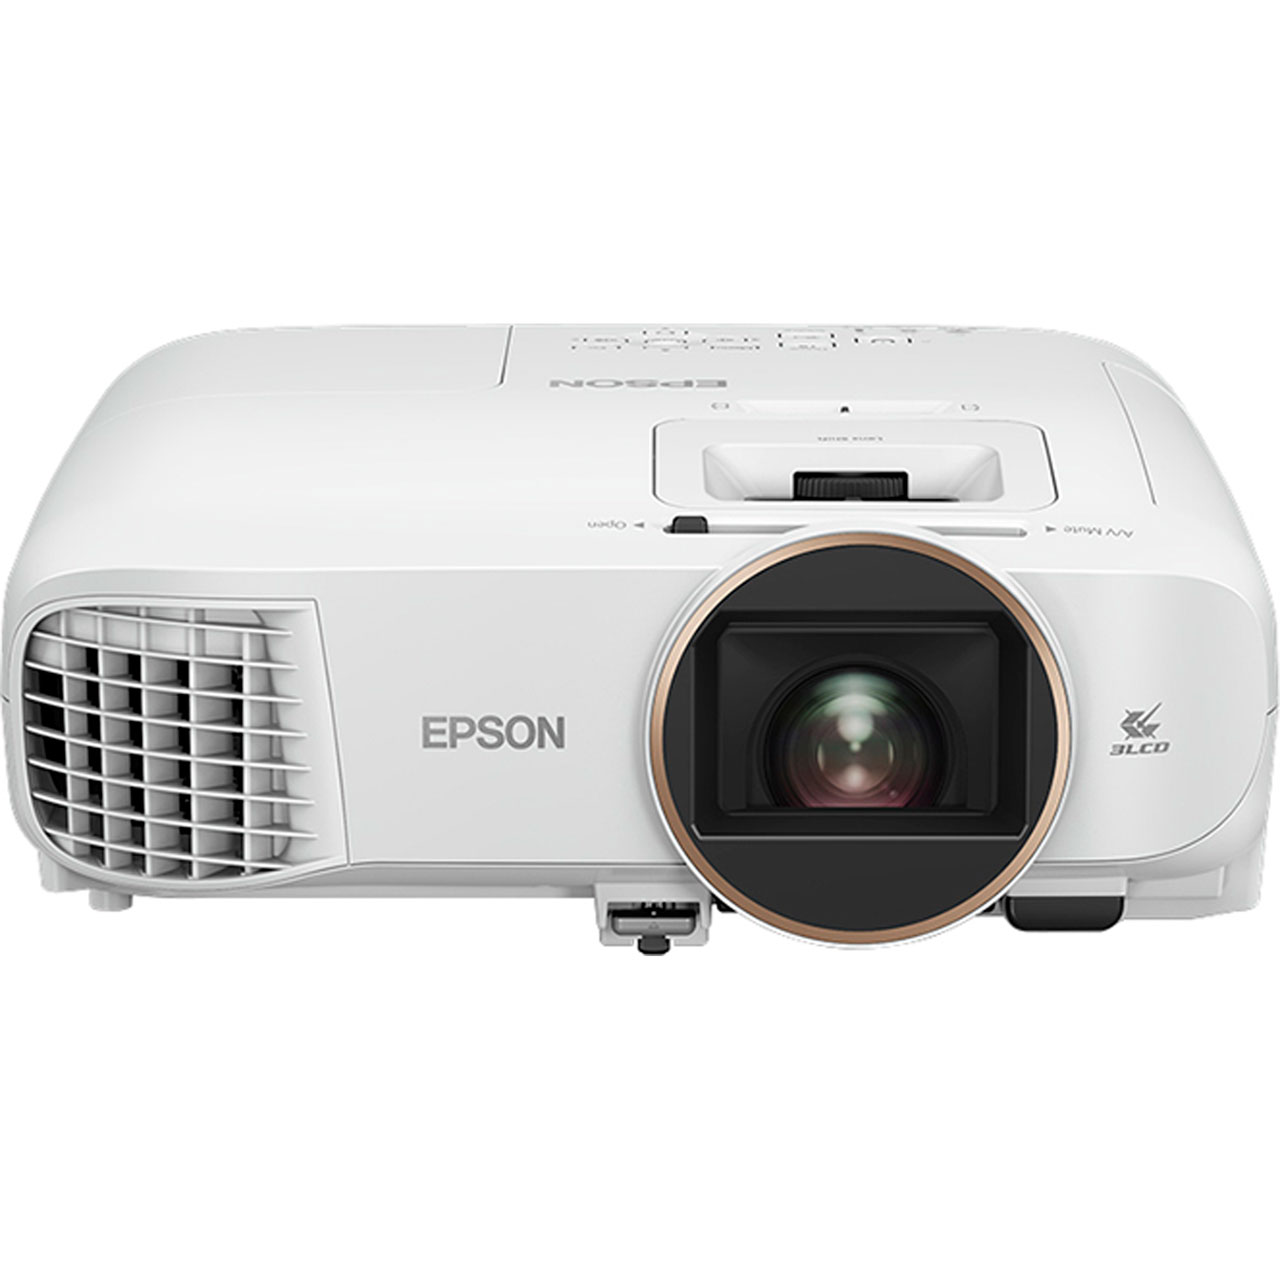 Epson EH-TW5650 Home Cinema Projector Full HD Review